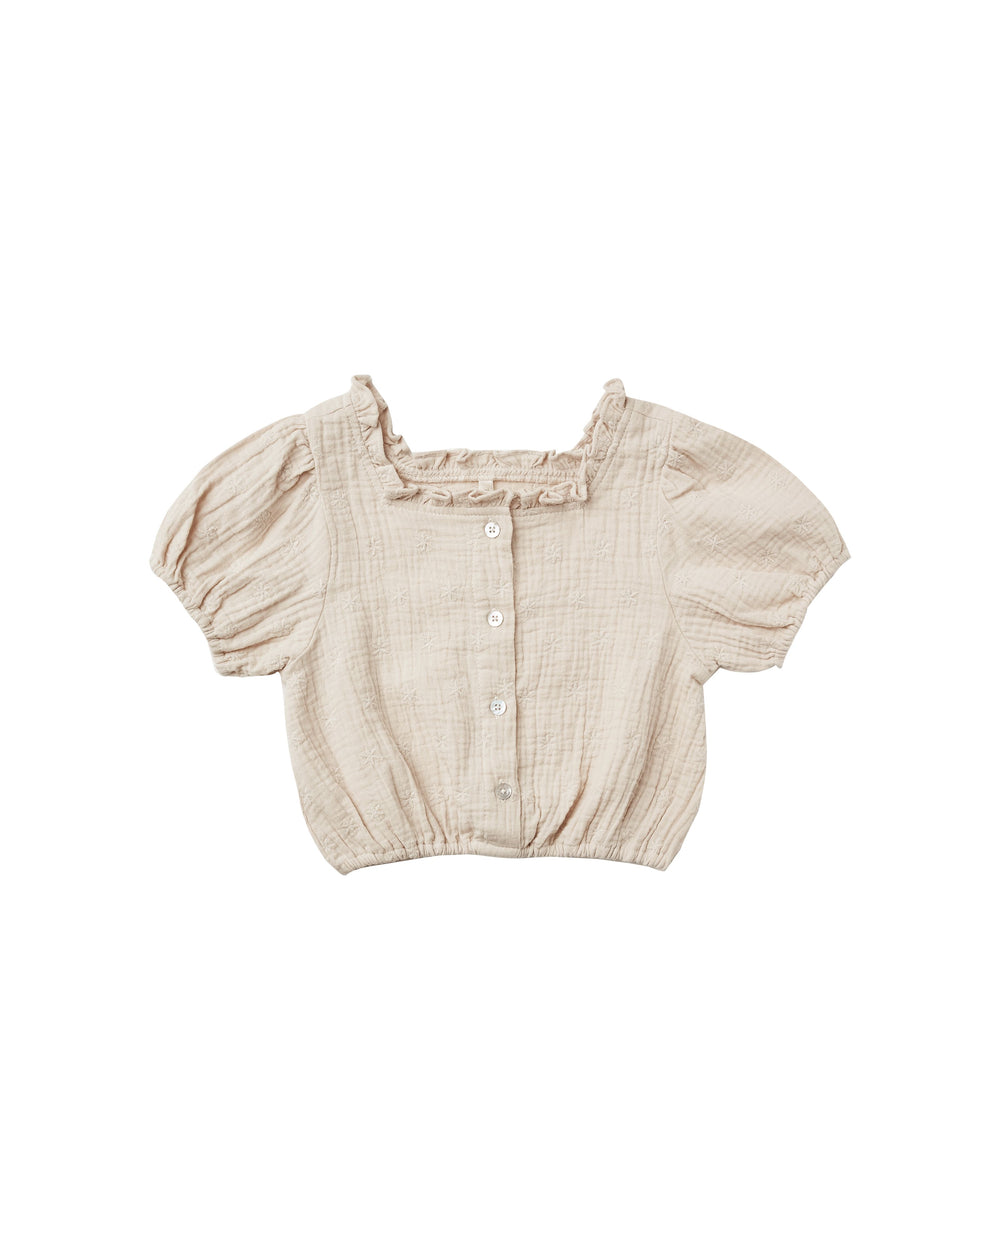 DYLAN BLOUSE || EMBROIDERED DAISY